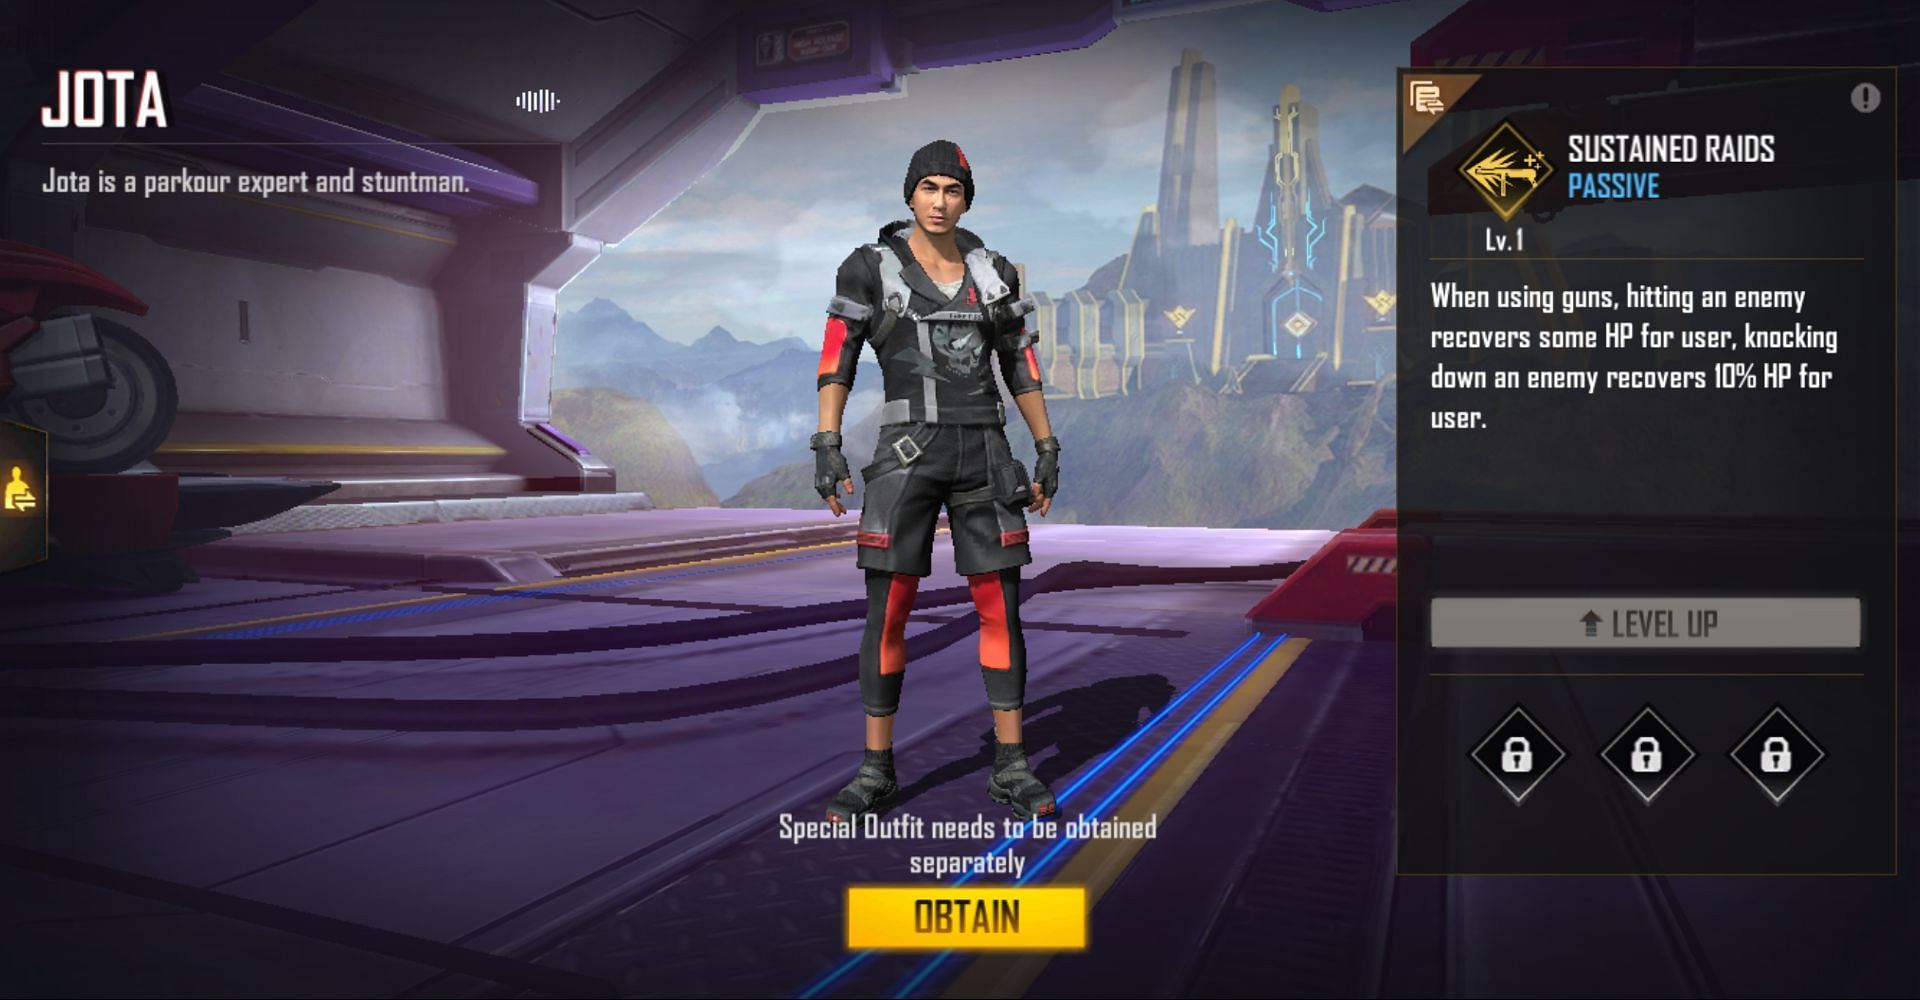 5 best Free Fire character combinations to rank push easily (May 2022)